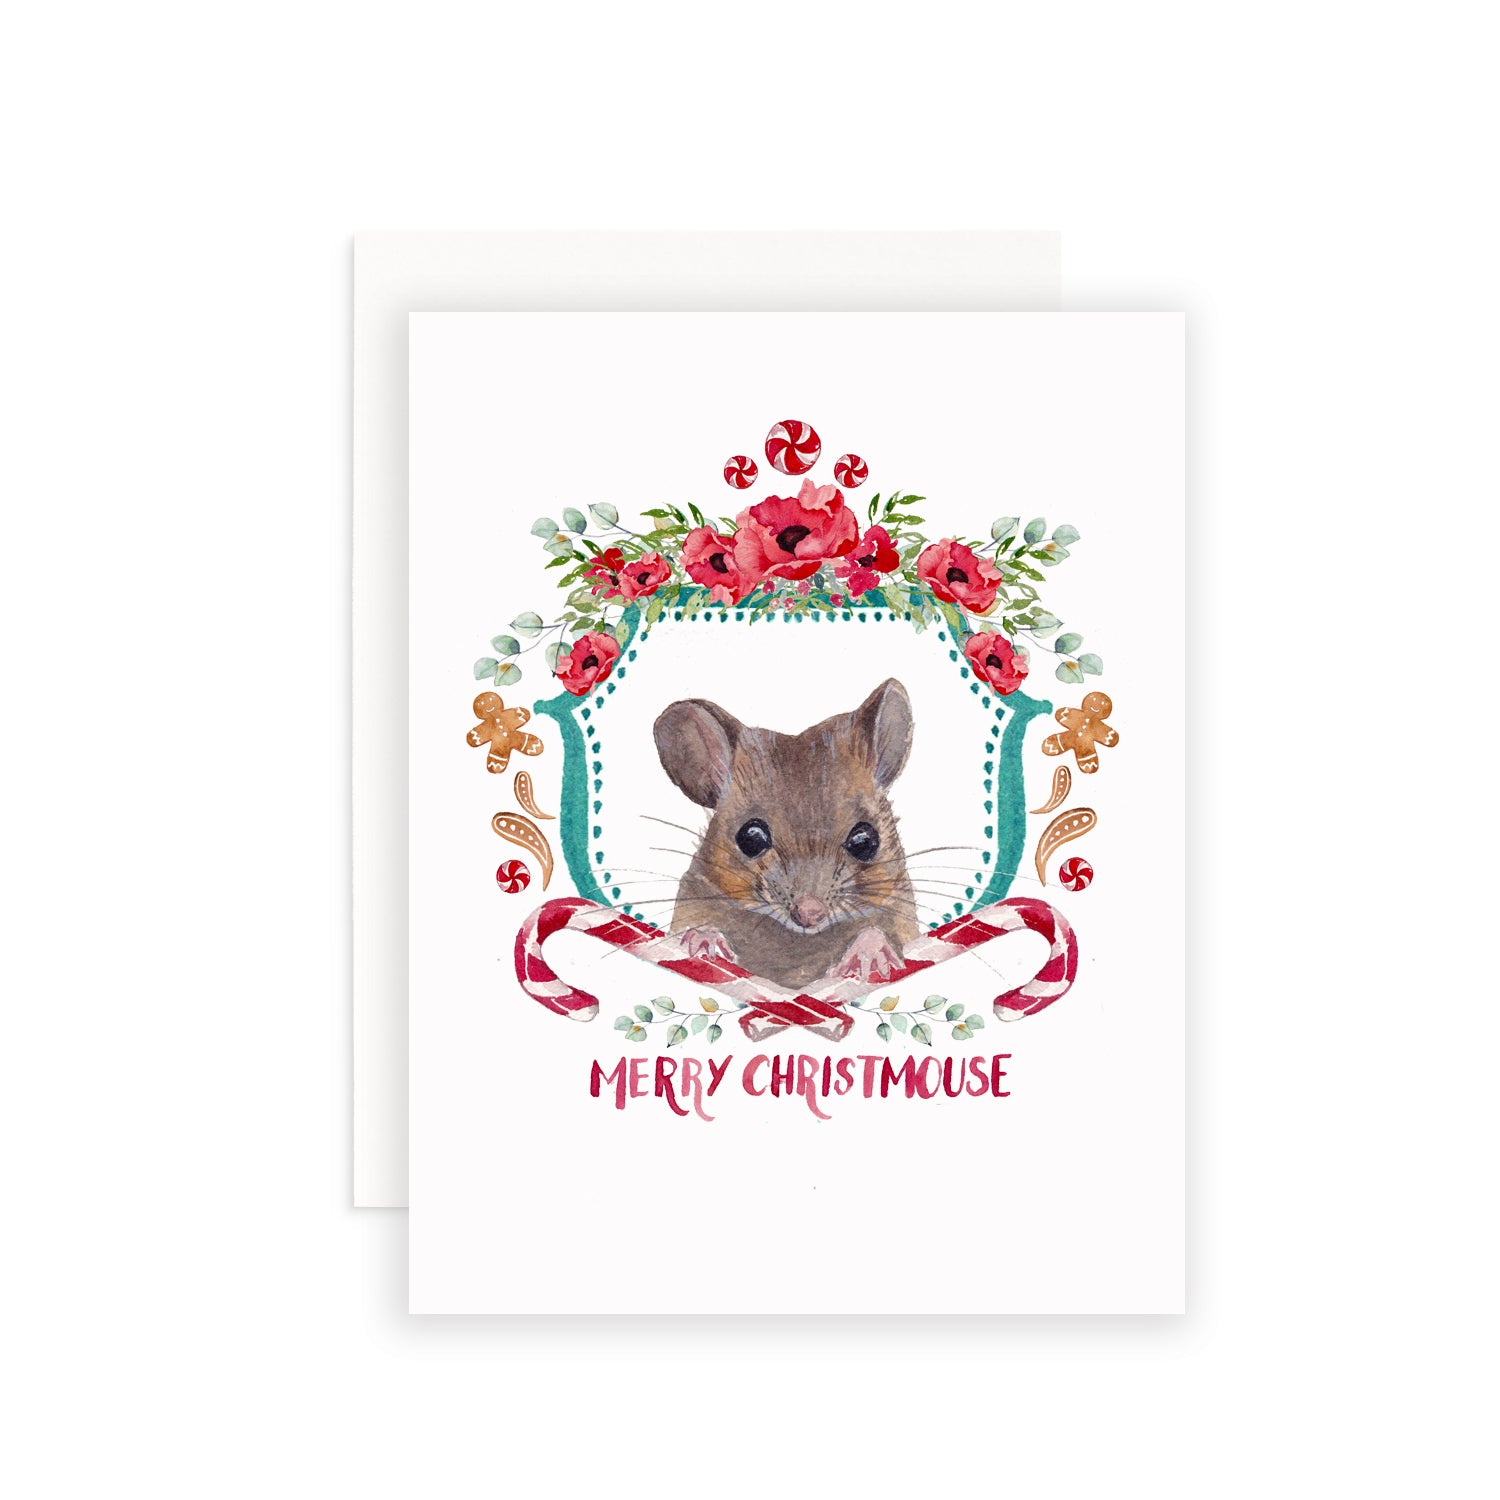 Merry Christmouse Greeting Card